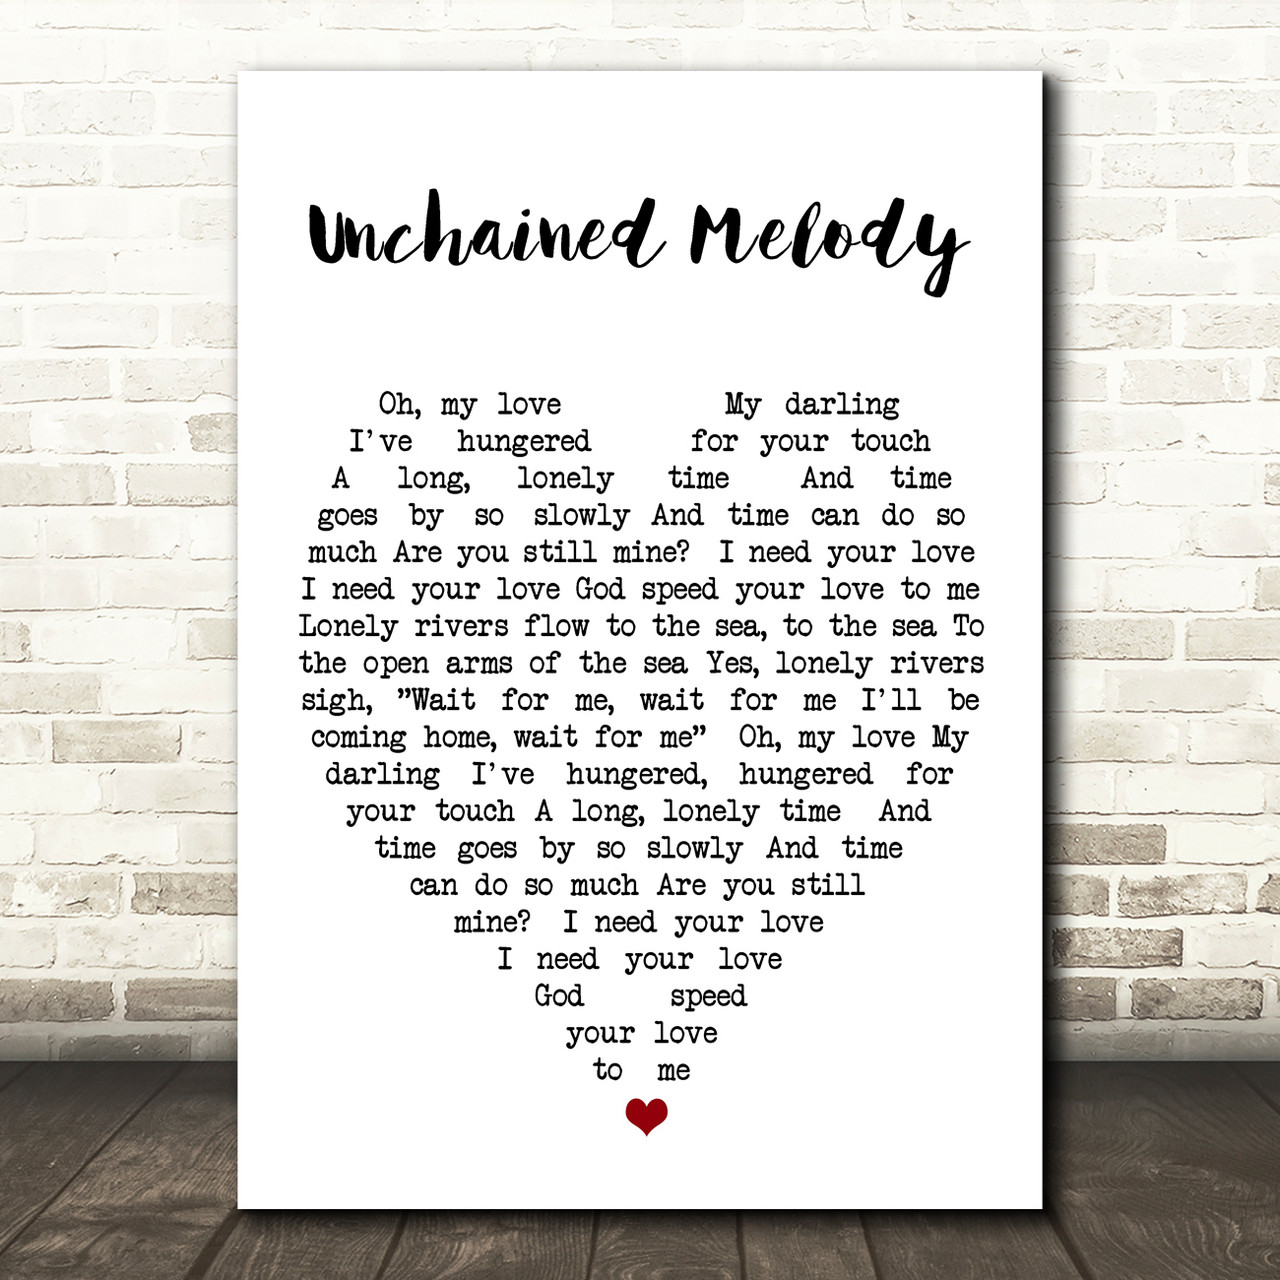 song lyrics unchained melody